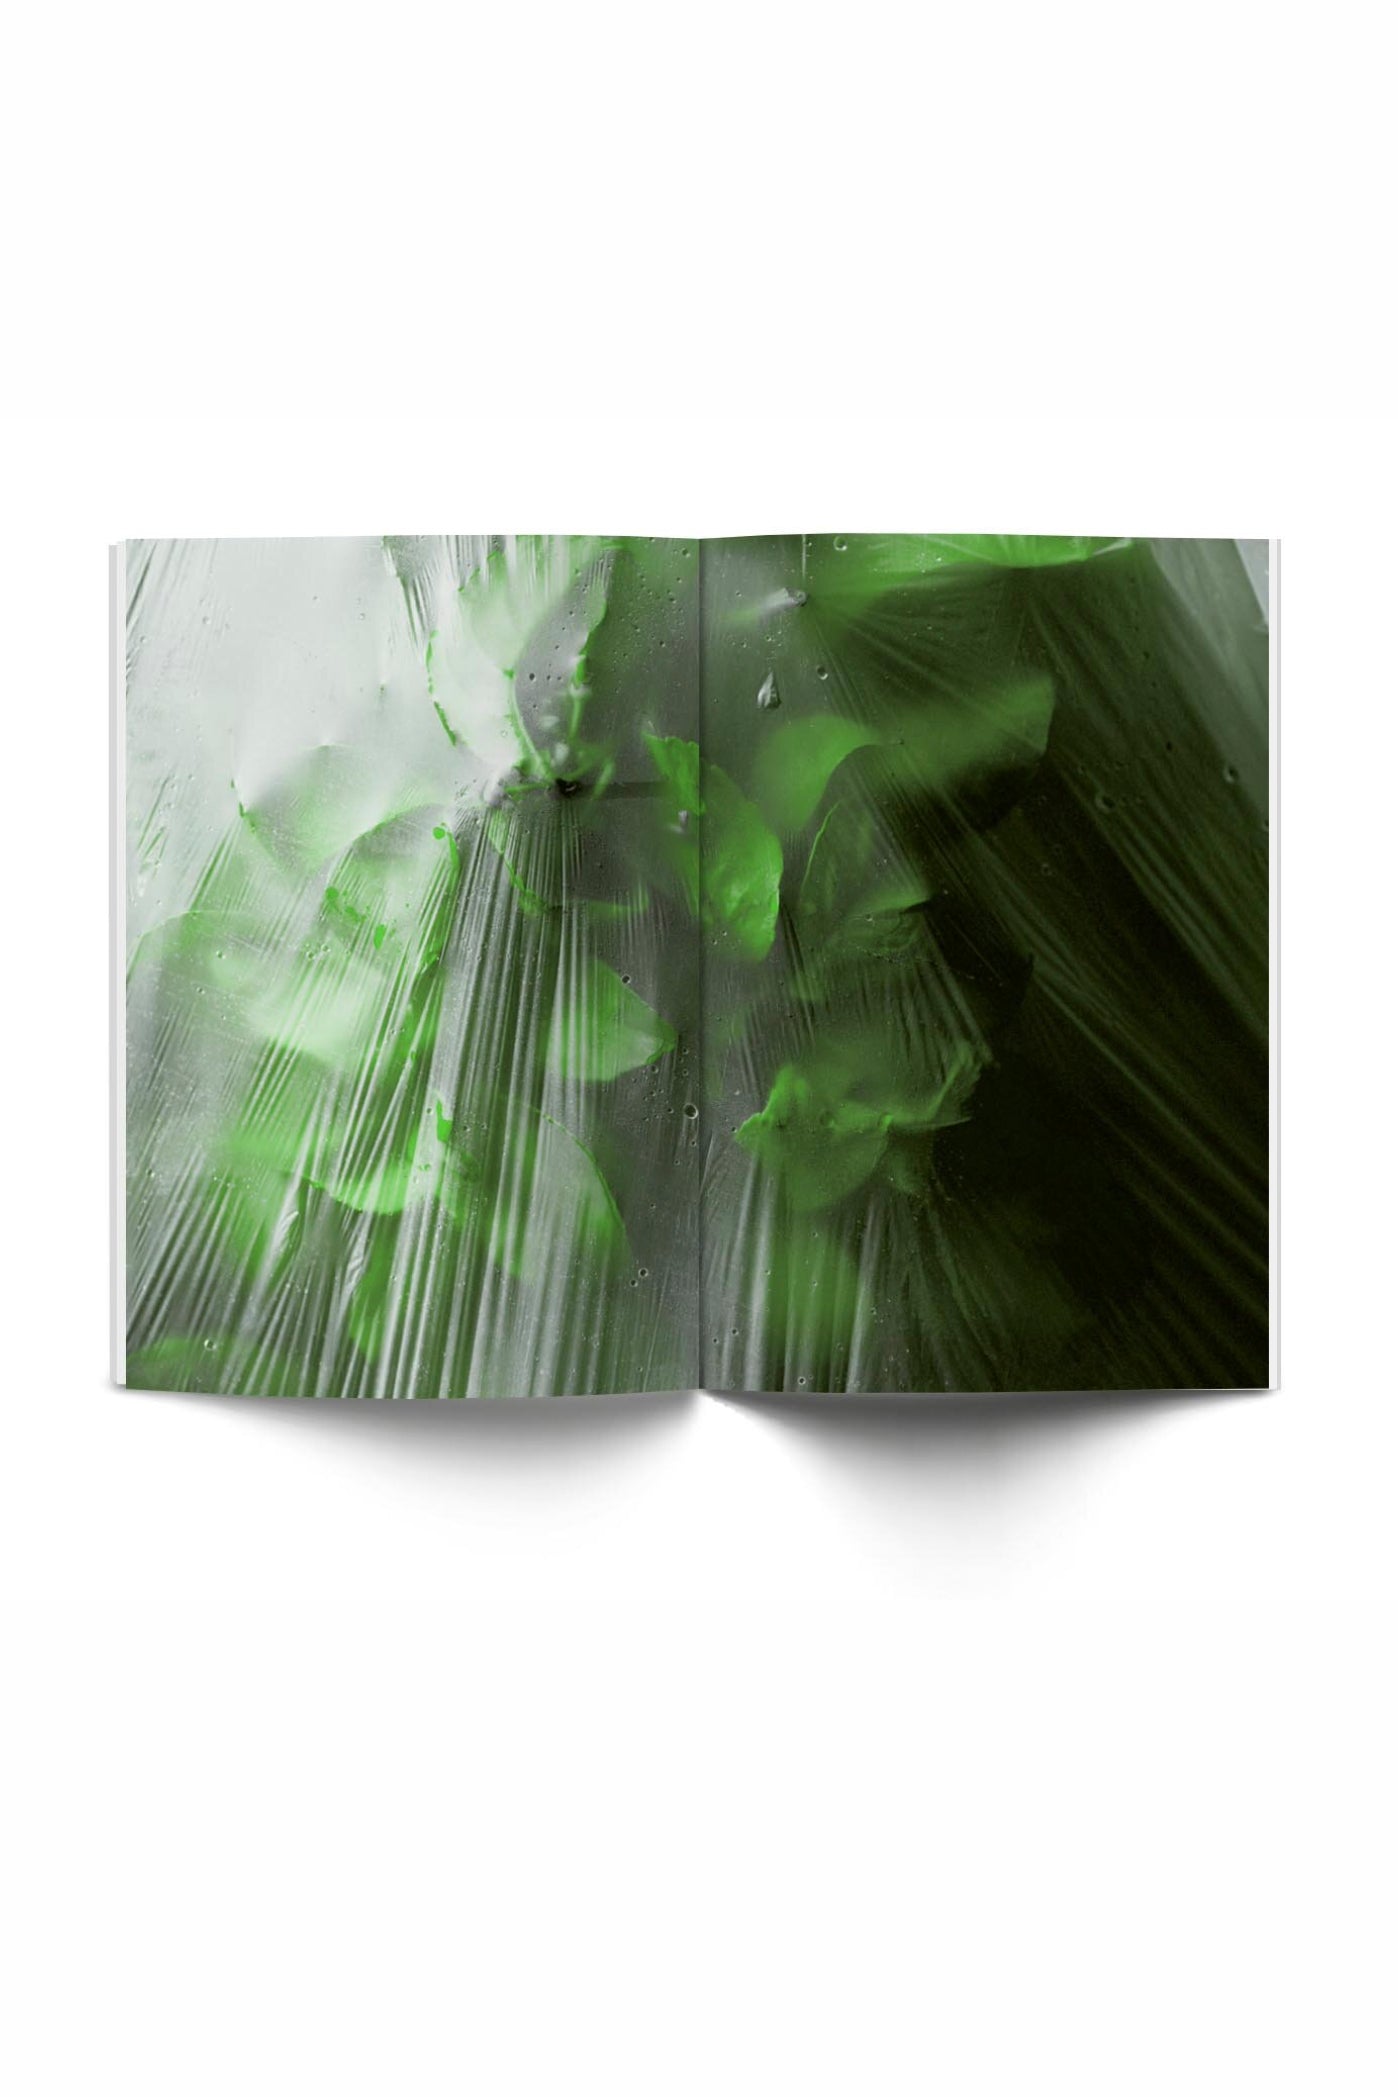 SINDROMS MAG Green issue